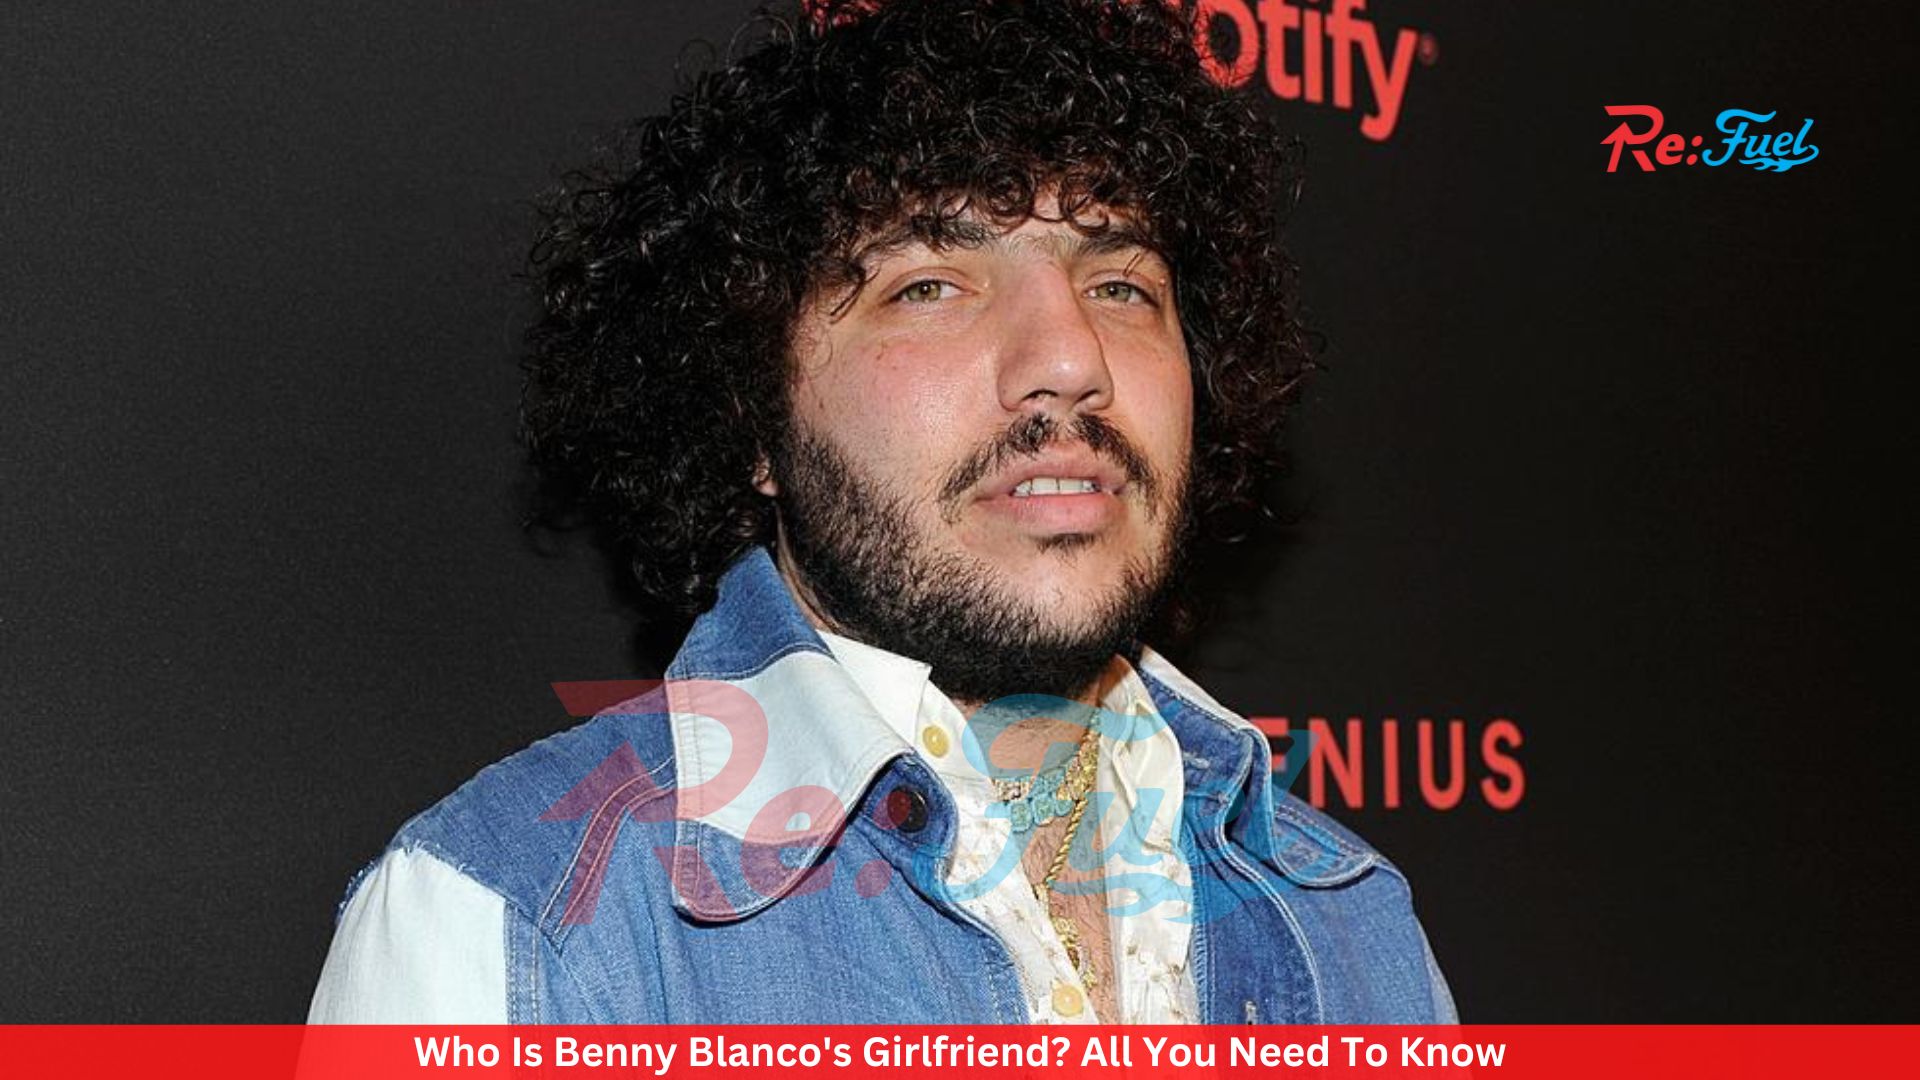 Who Is Benny Blanco's Girlfriend? All You Need To Know